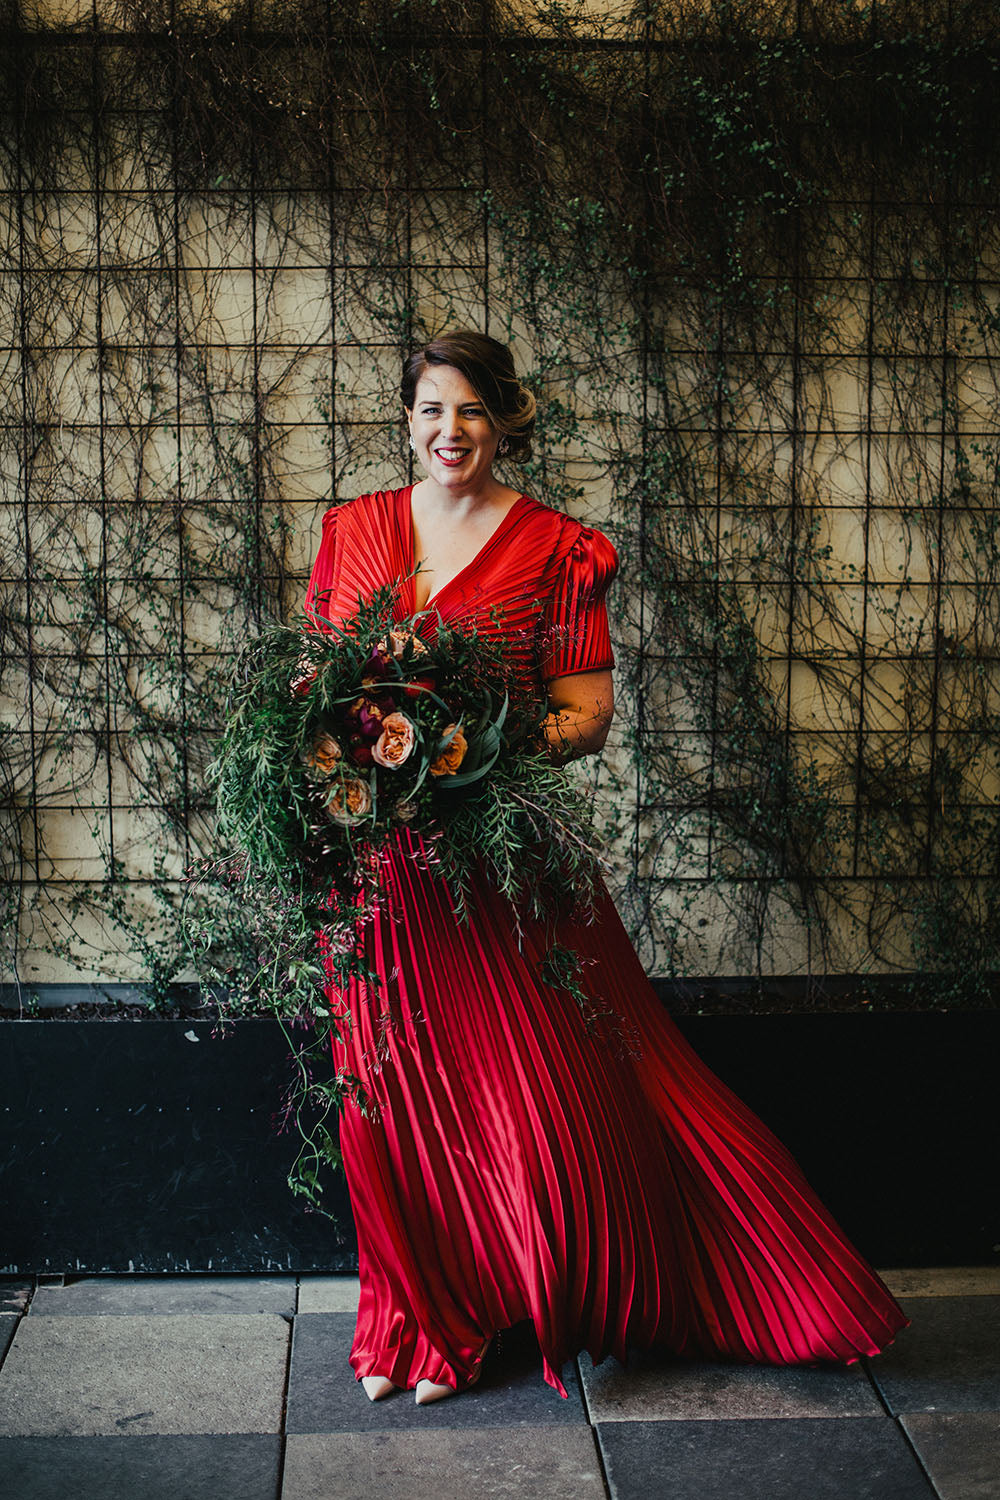 Bride holding bridal bouquet at wedding in red dress